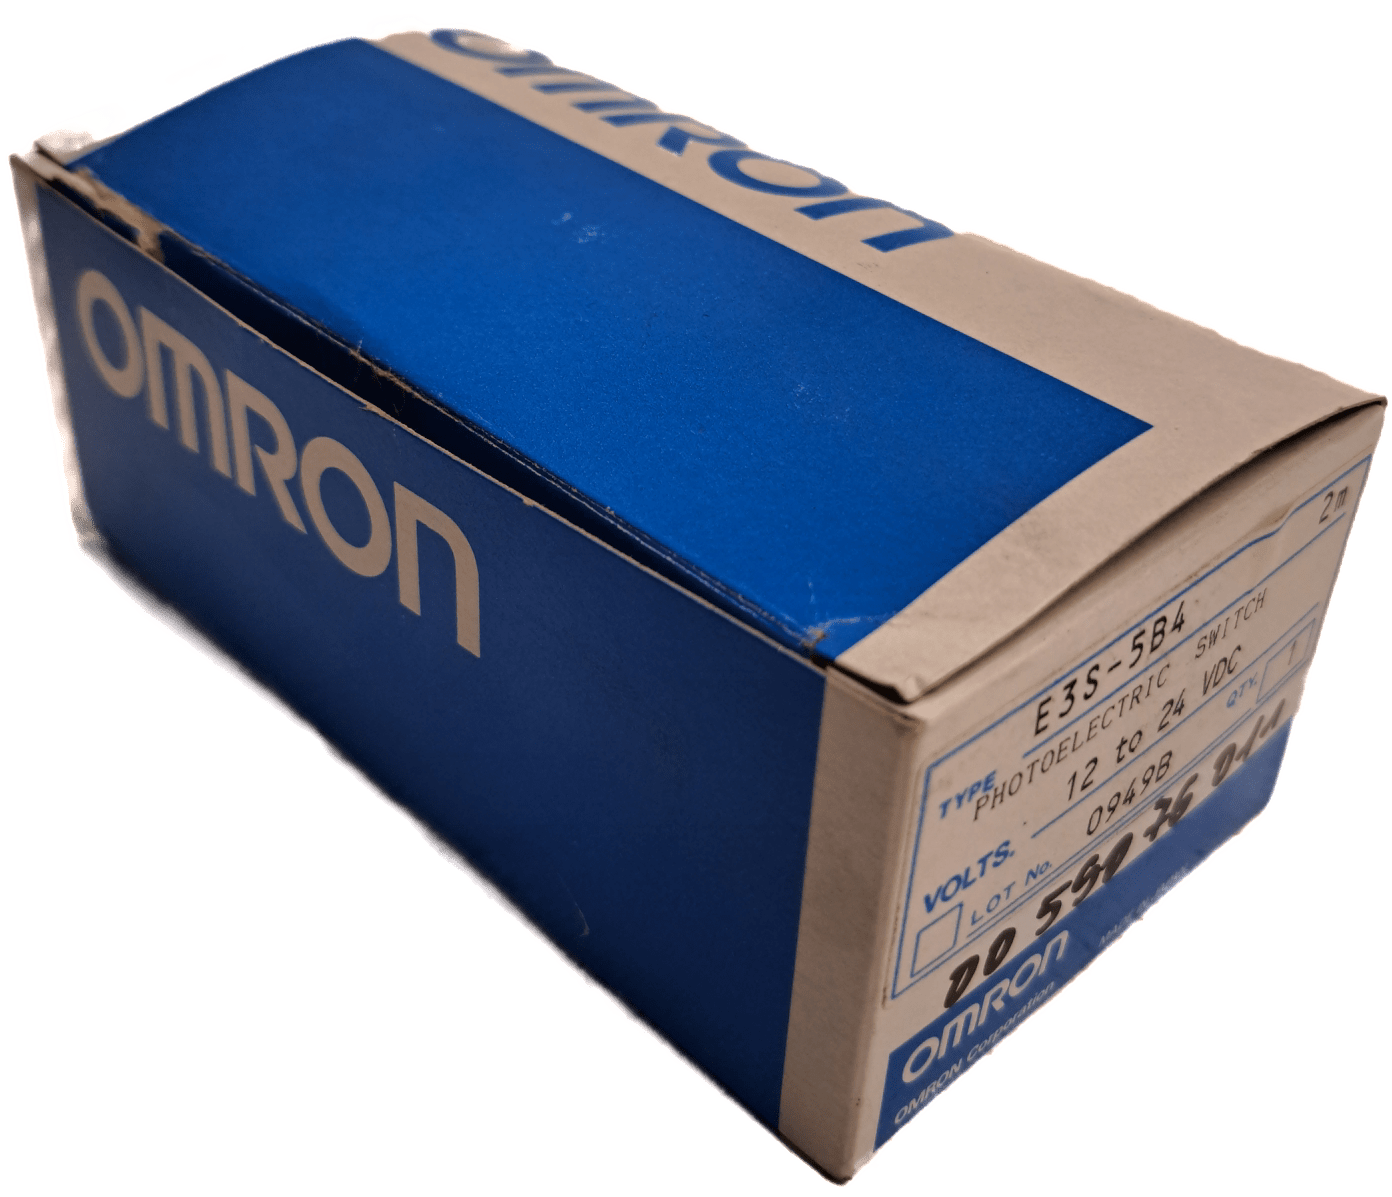 Omron Photoelectric switch E3S-5DB4 - #product_category# | Klenk Maschinenhandel